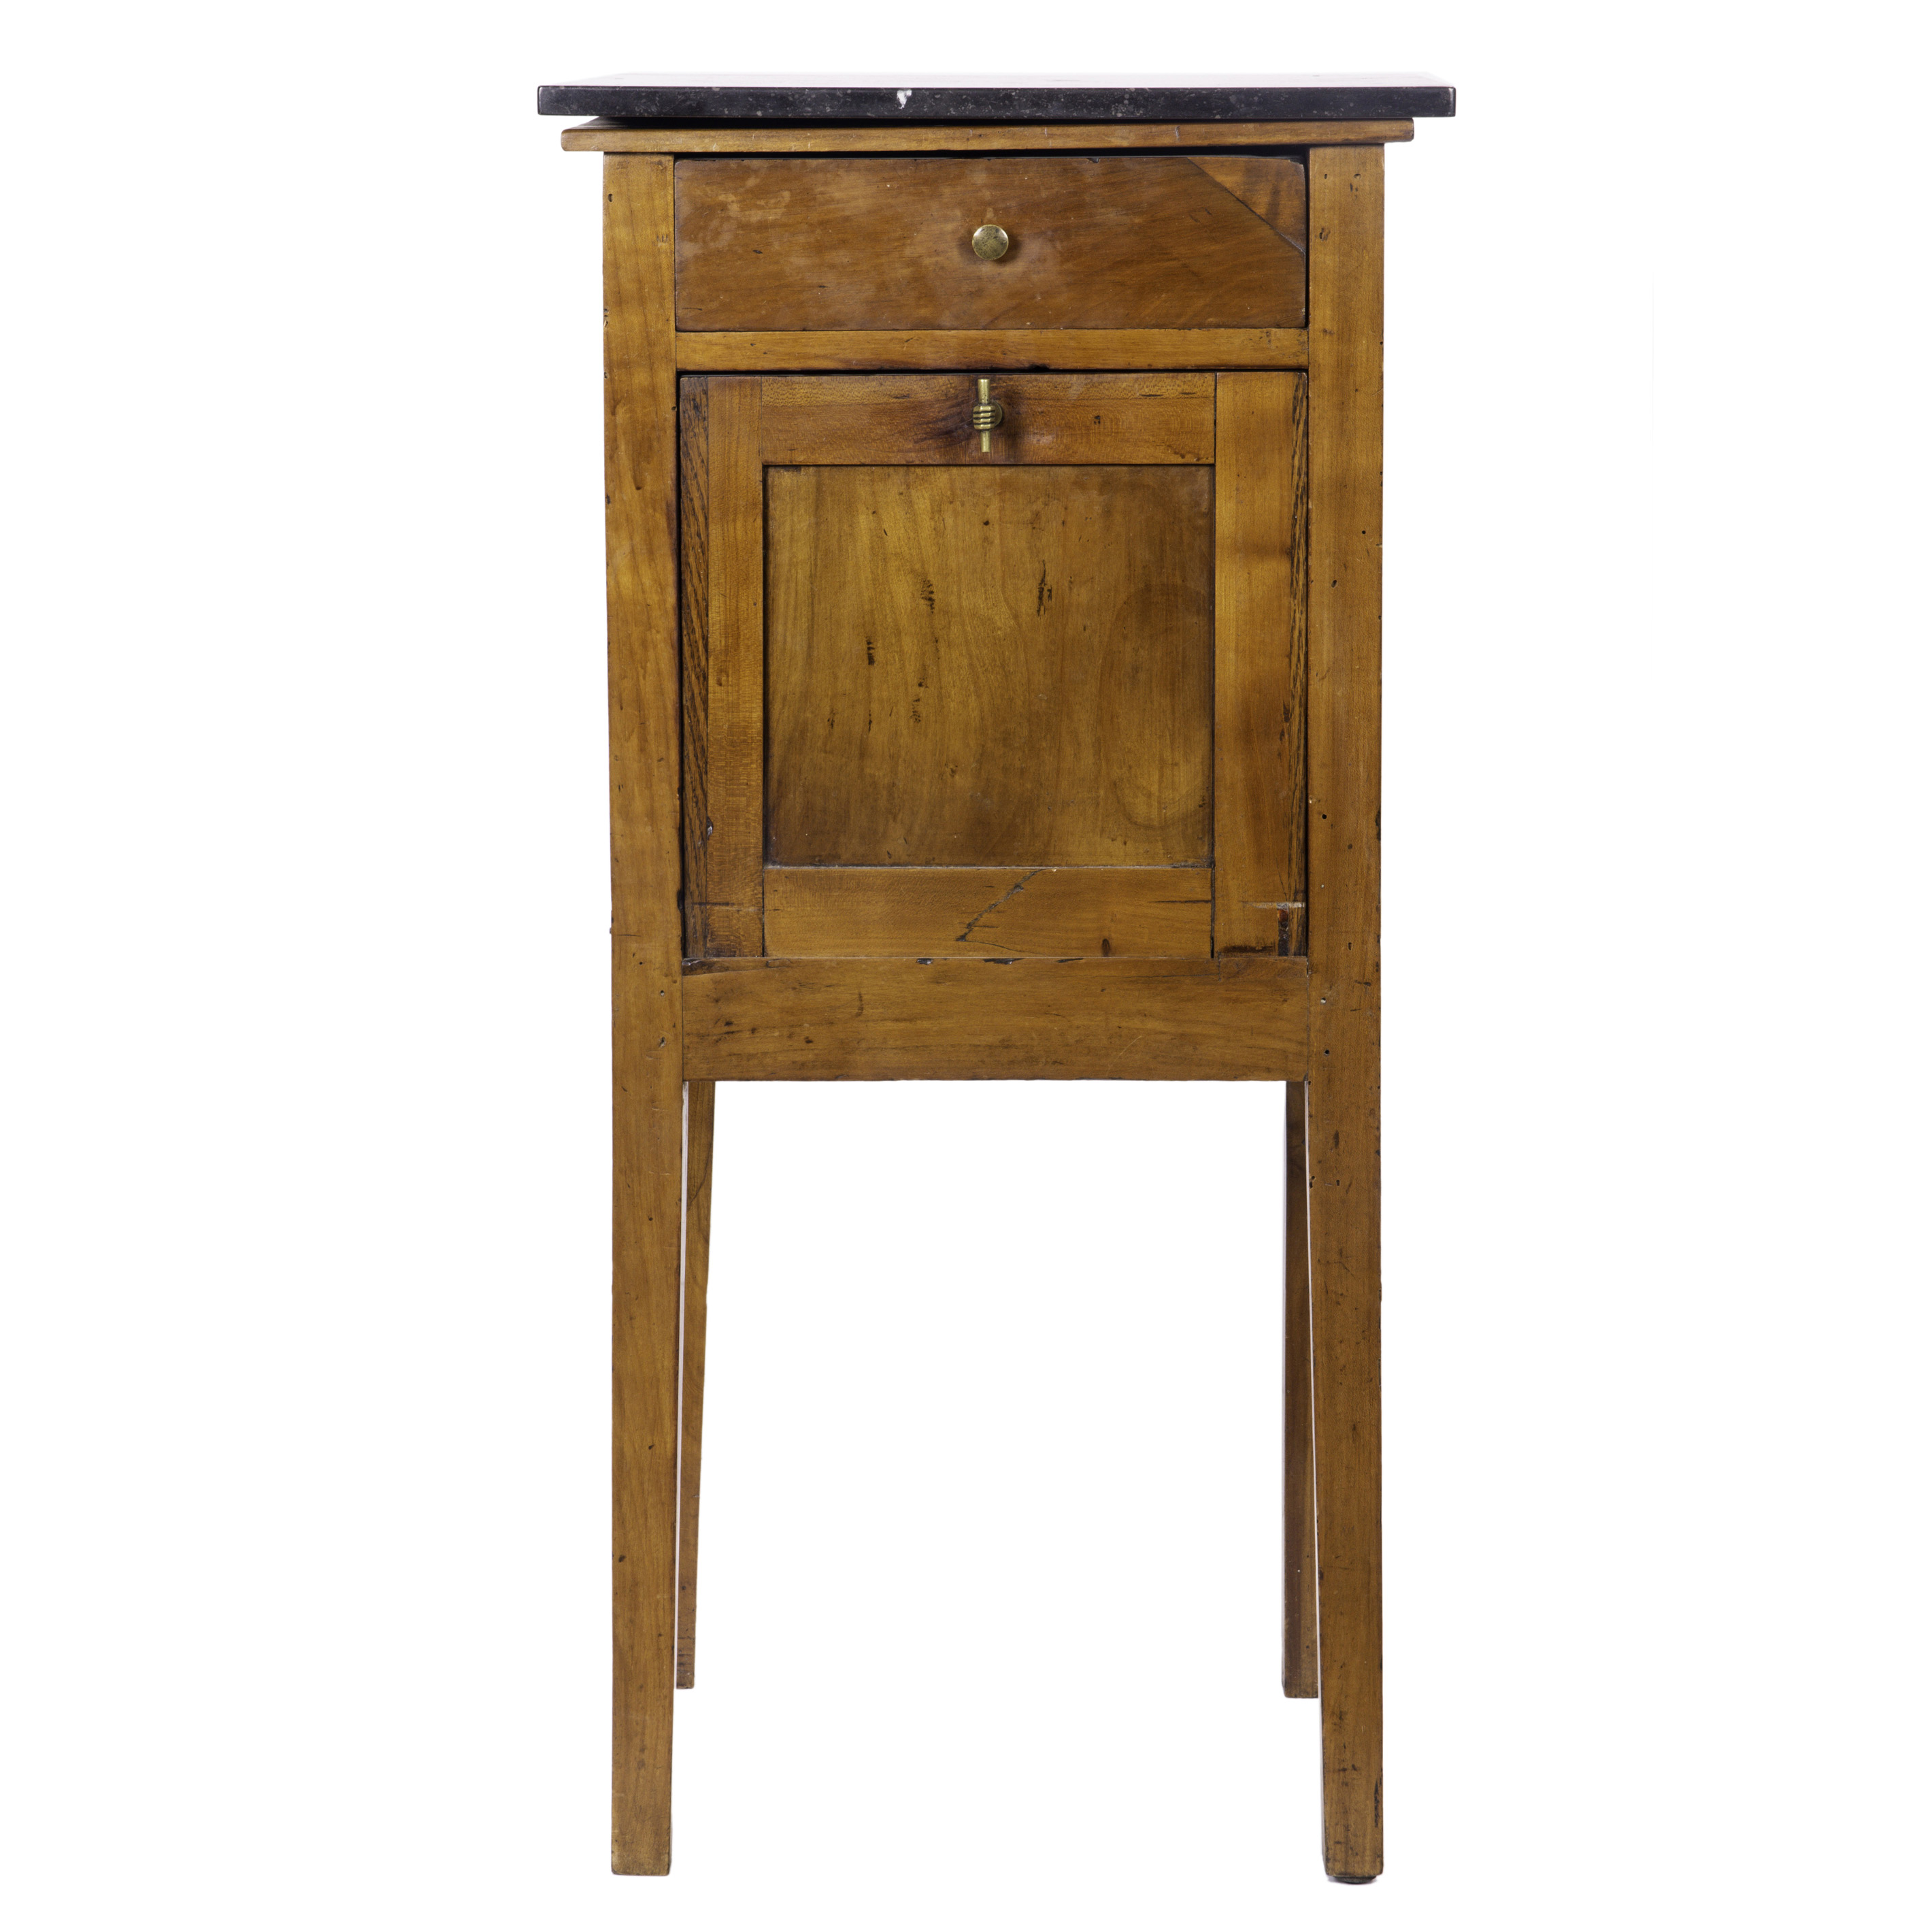 EDWARDIAN MARBLE TOP BEDSIDE TABLE